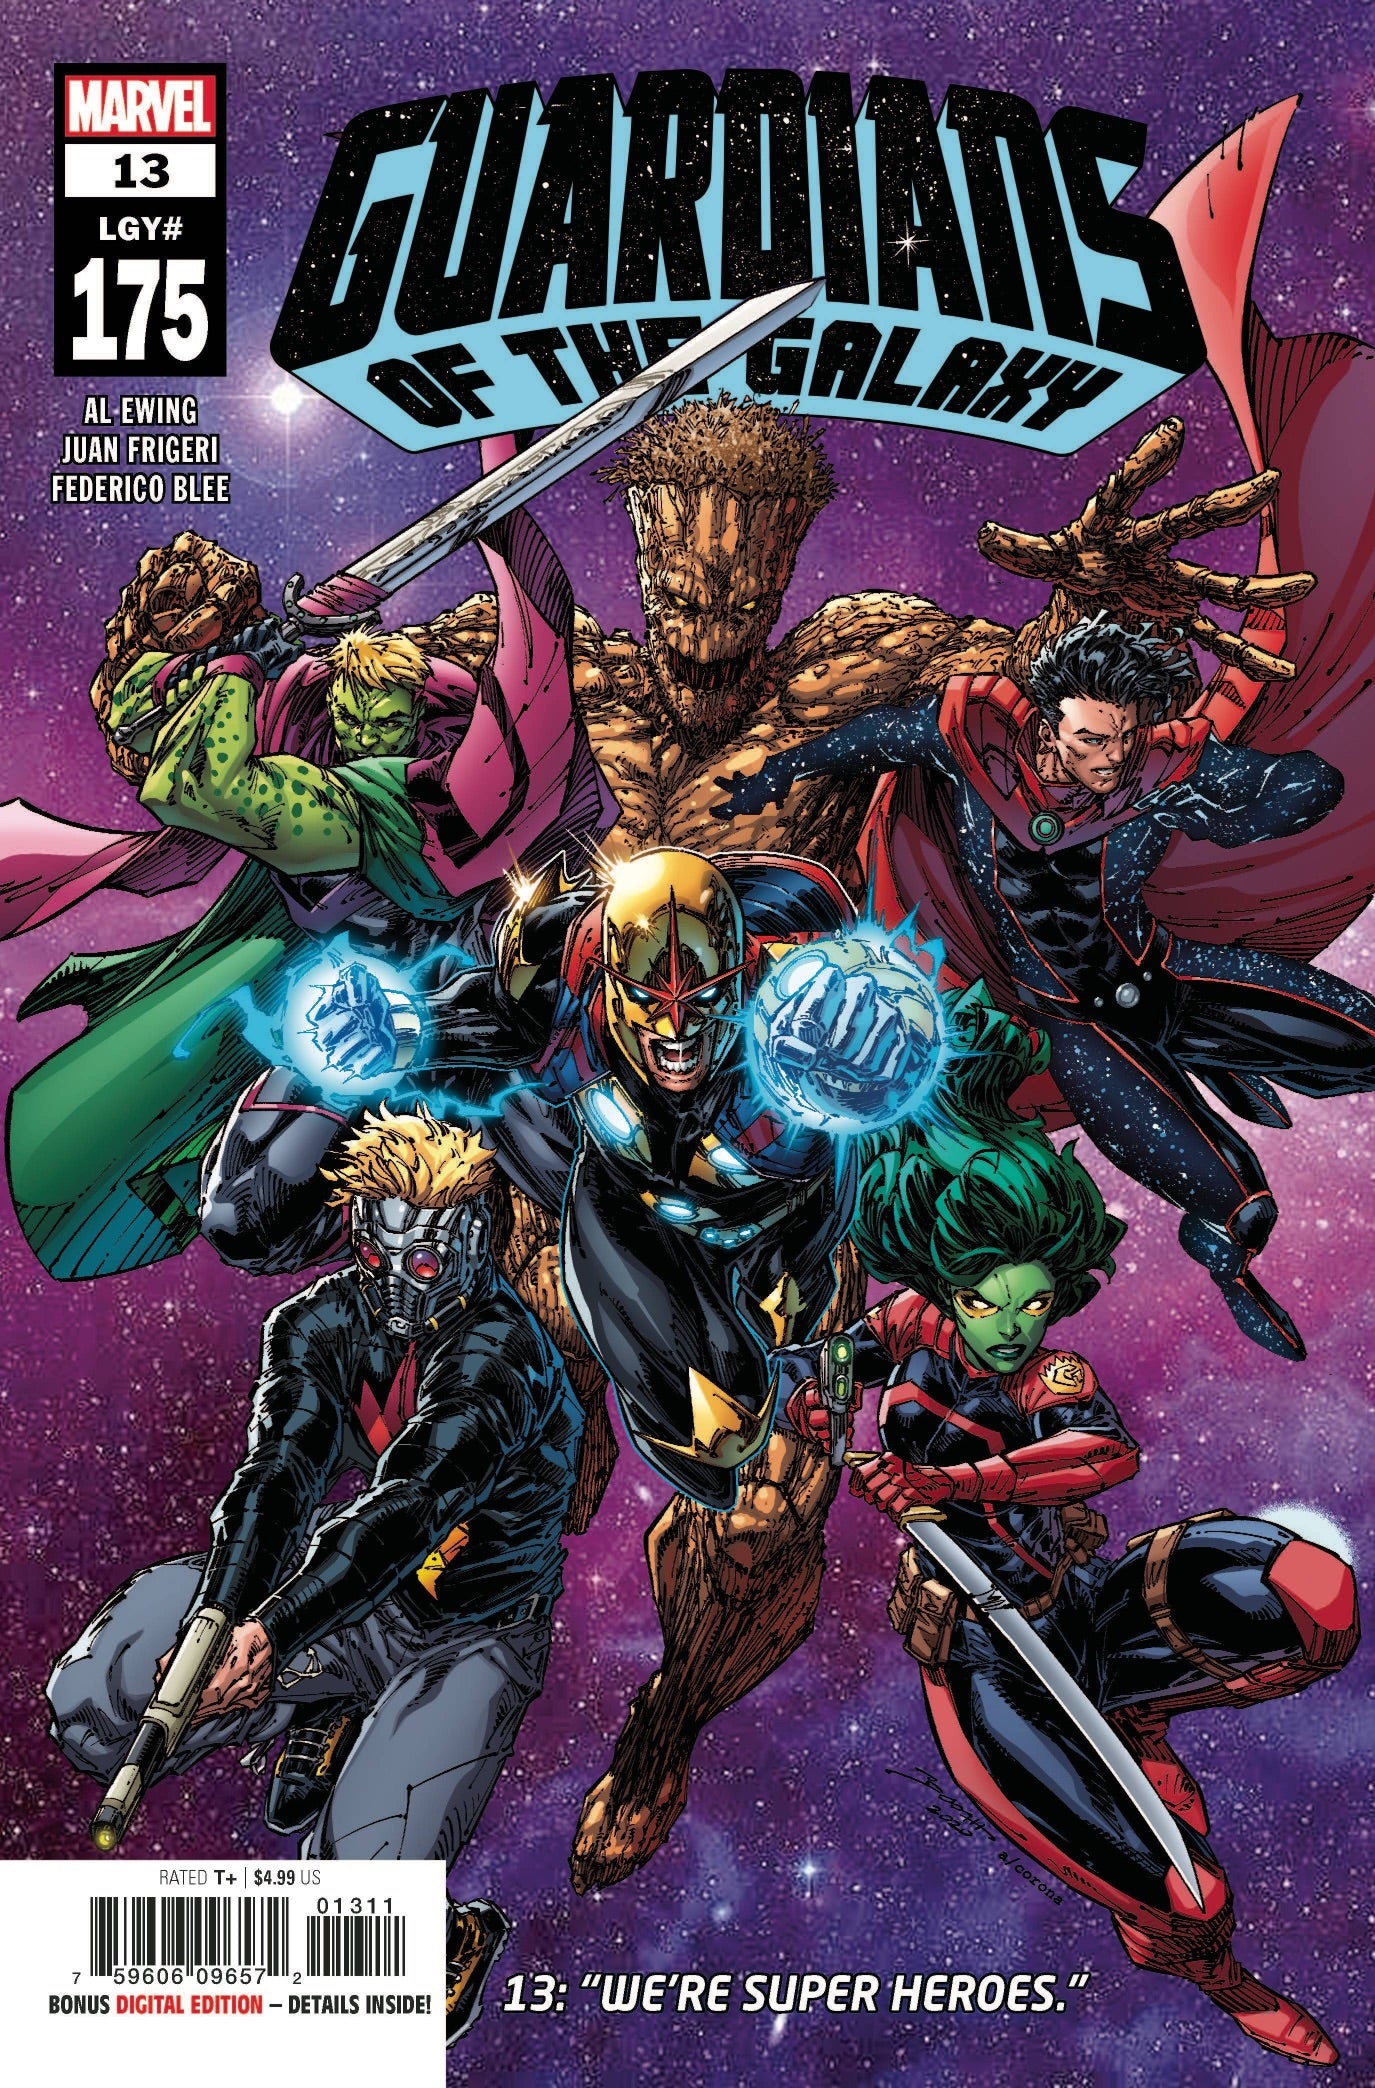 GUARDIANS OF THE GALAXY #13